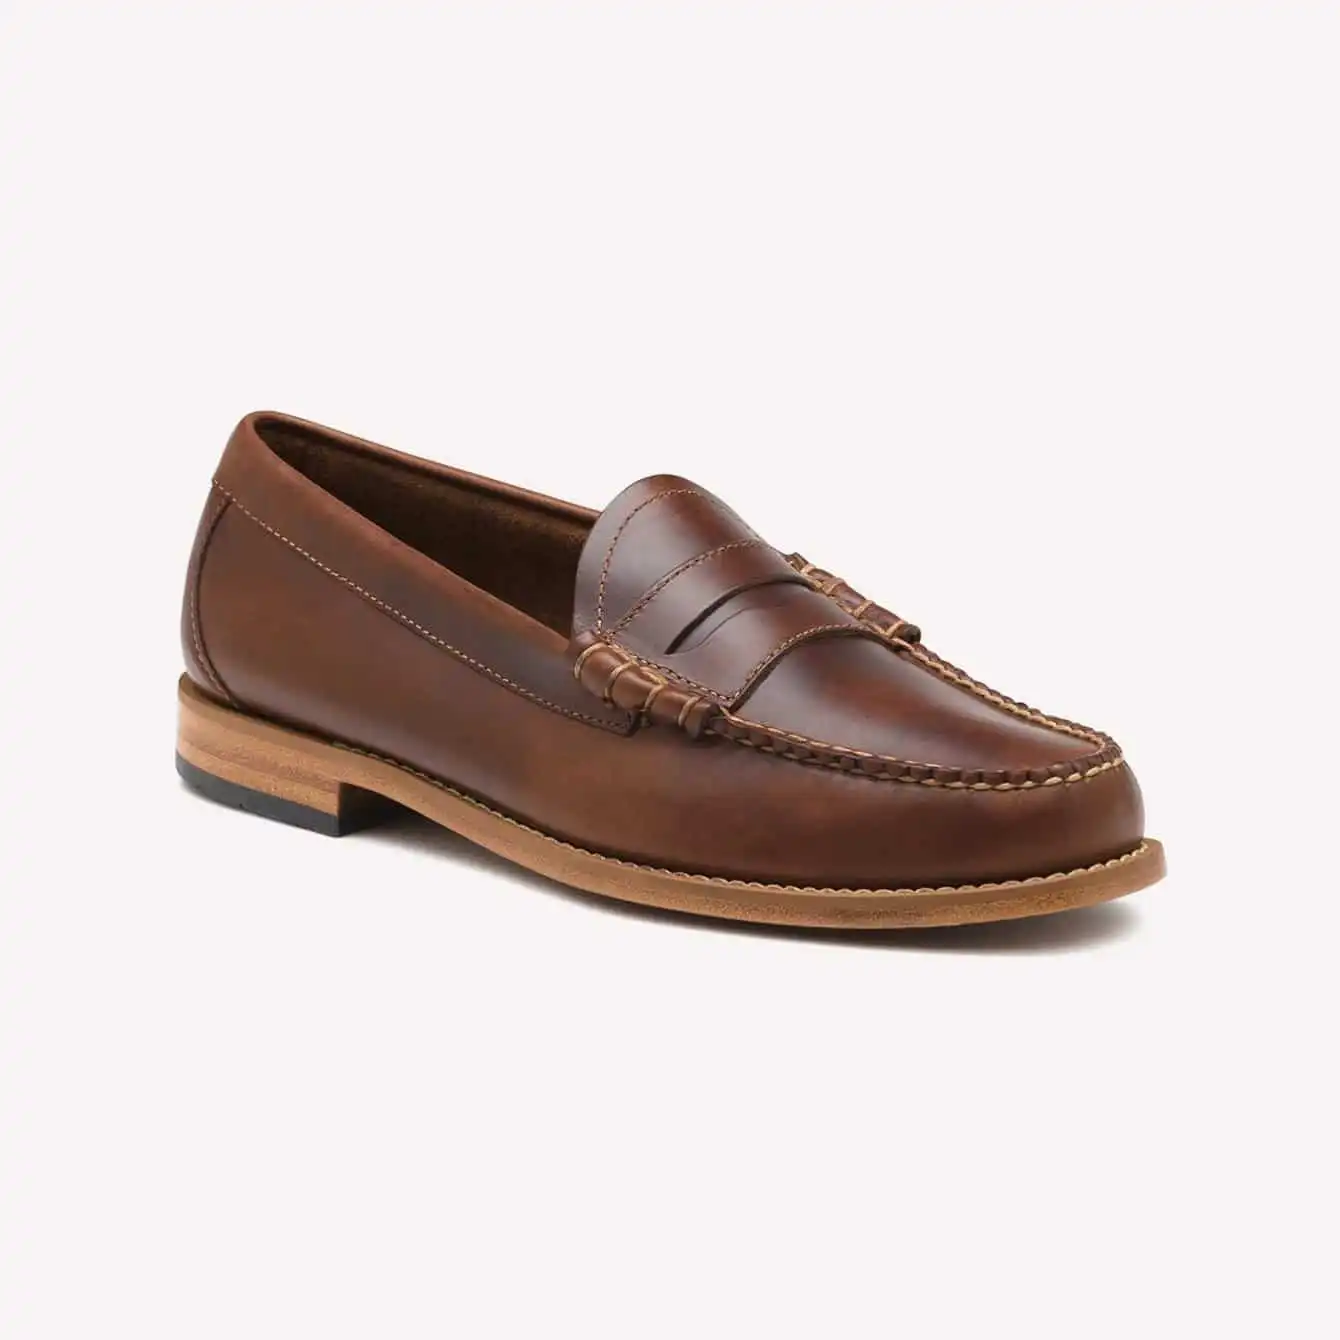 G.H. Bass Larson Weejuns loafer